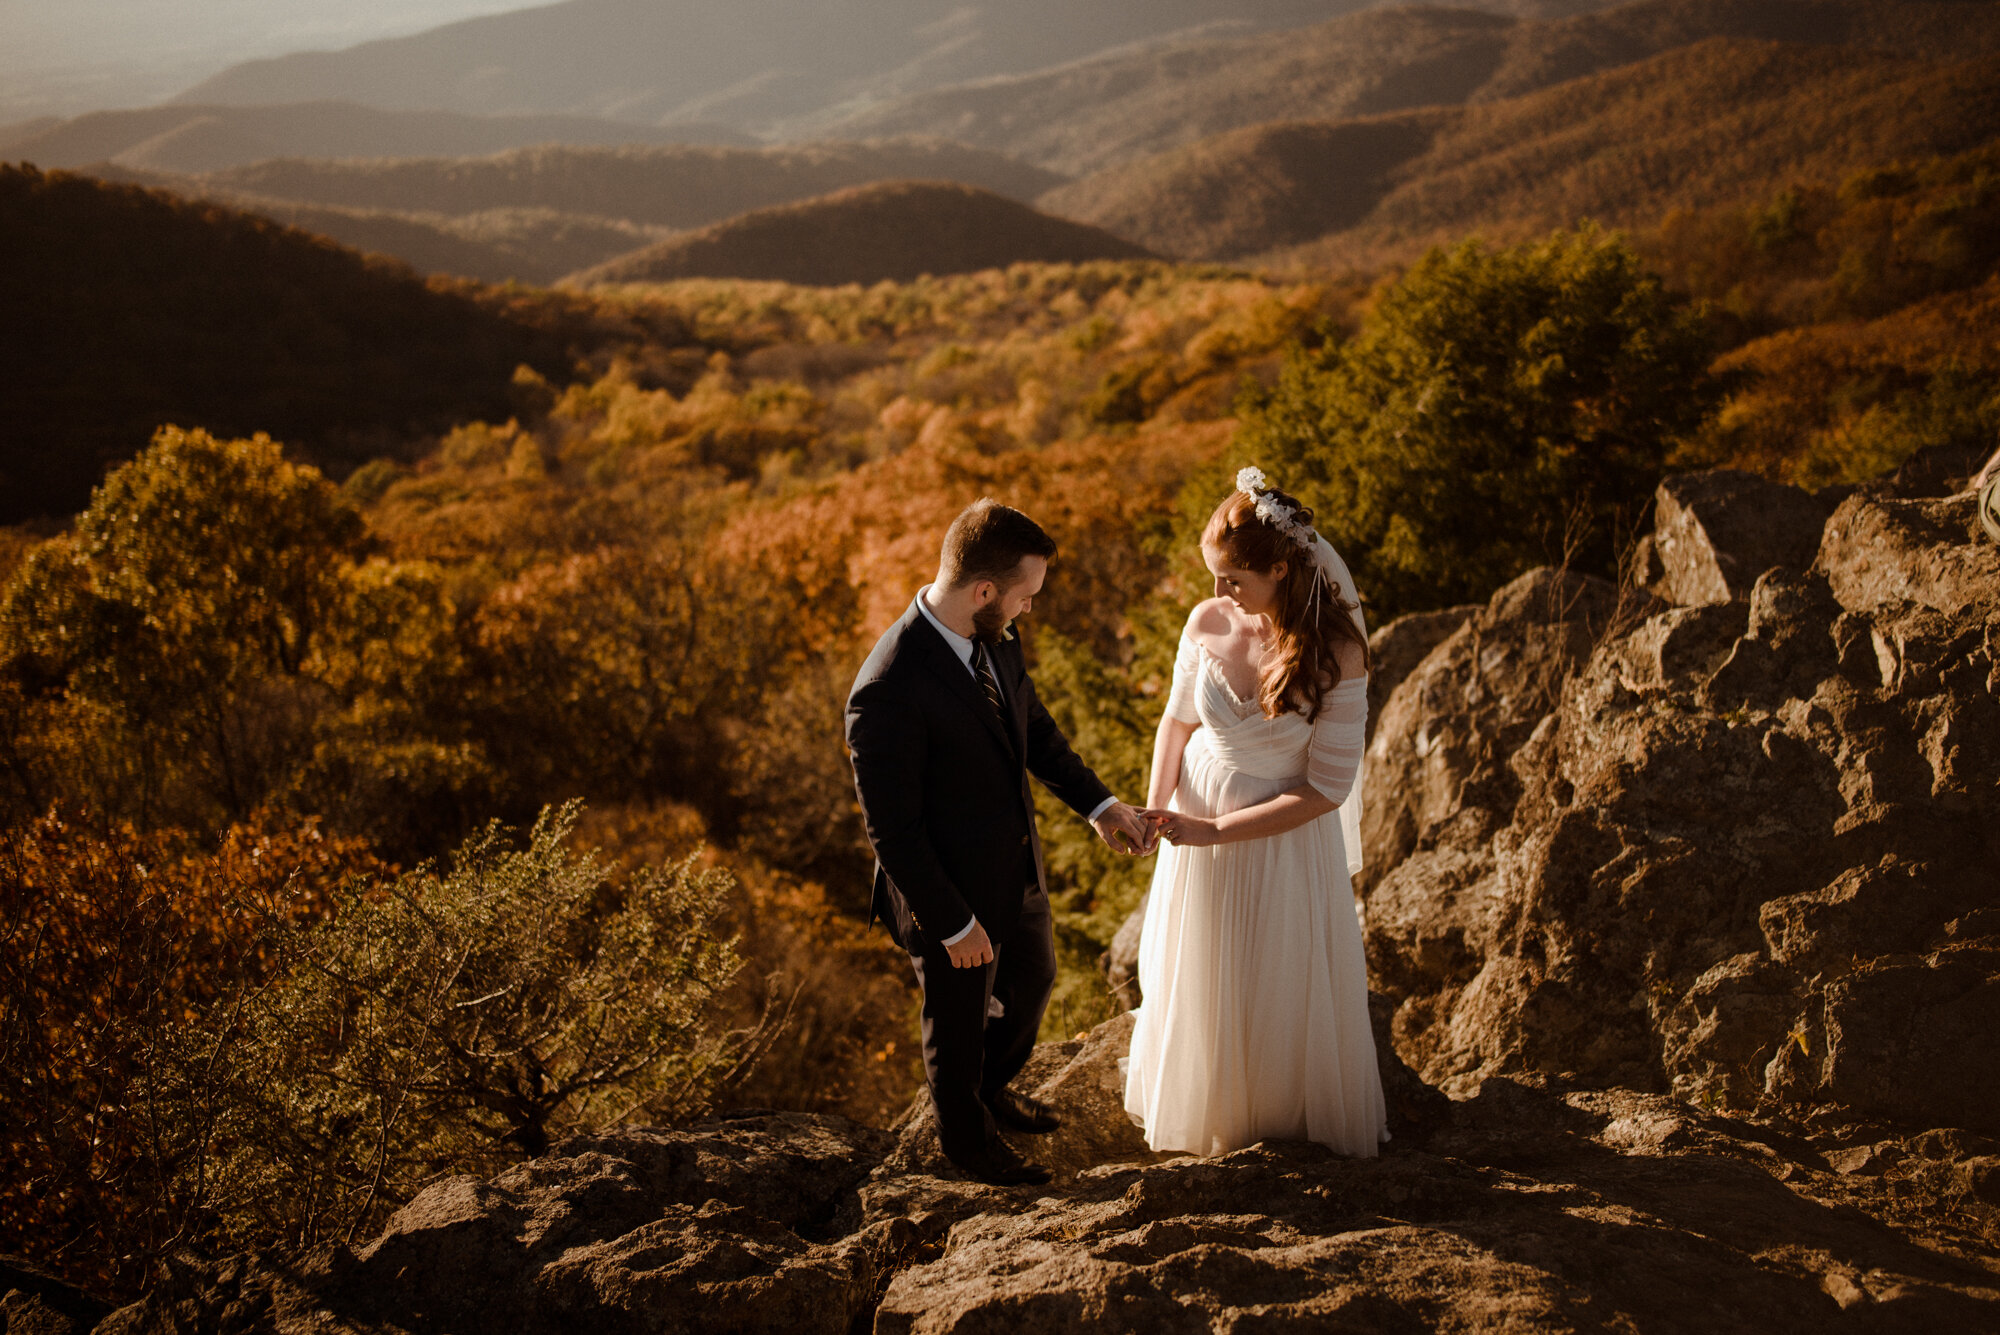 Emily and Ryan - Mountain Top Elopement - Shenandoah National Park - Blue Ridge Mountains Couple Photo Shoot in the Fall - White Sails Creative_39.jpg